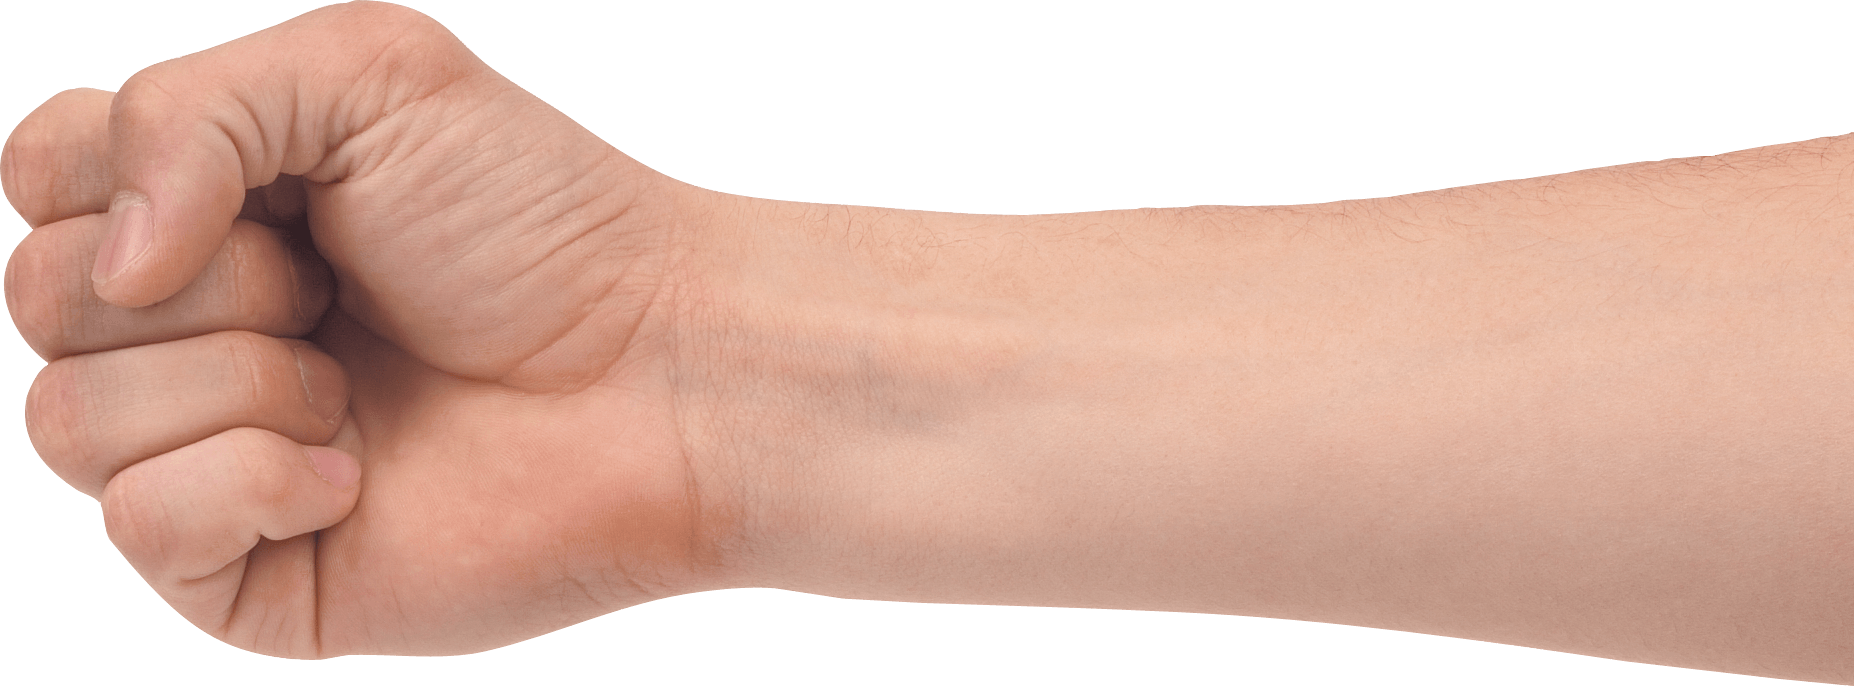 Punch Hand Free Download PNG HD PNG Image